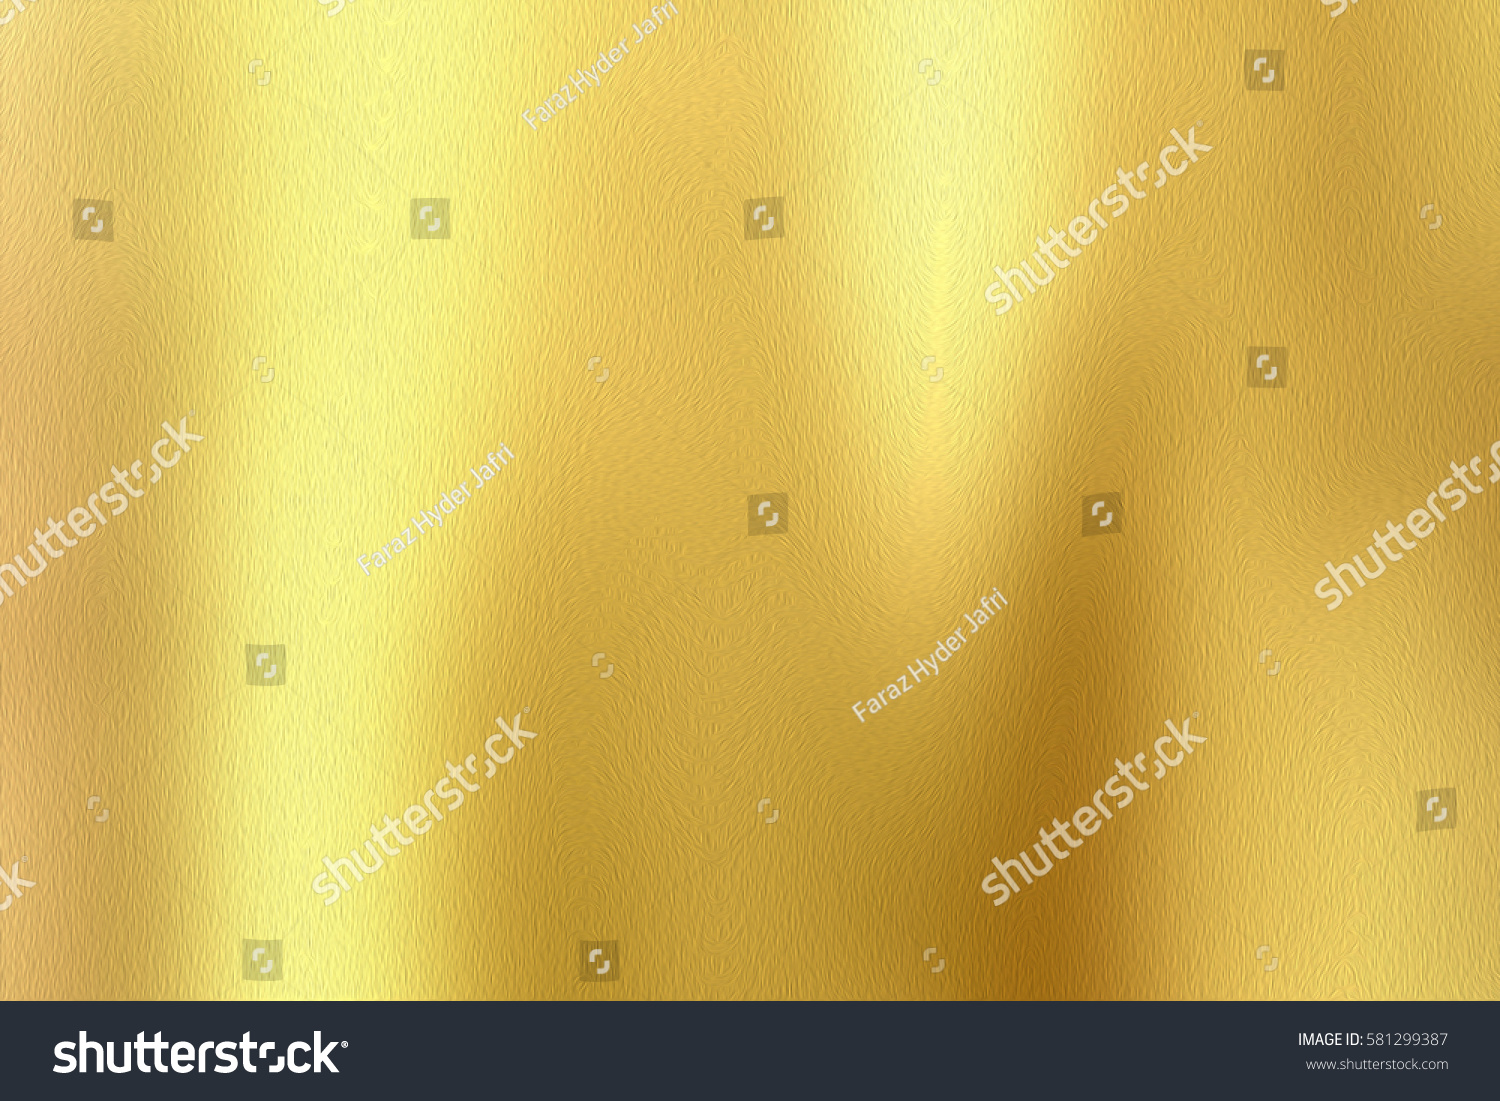 Gold background | gold polished metal, steel texture #581299387